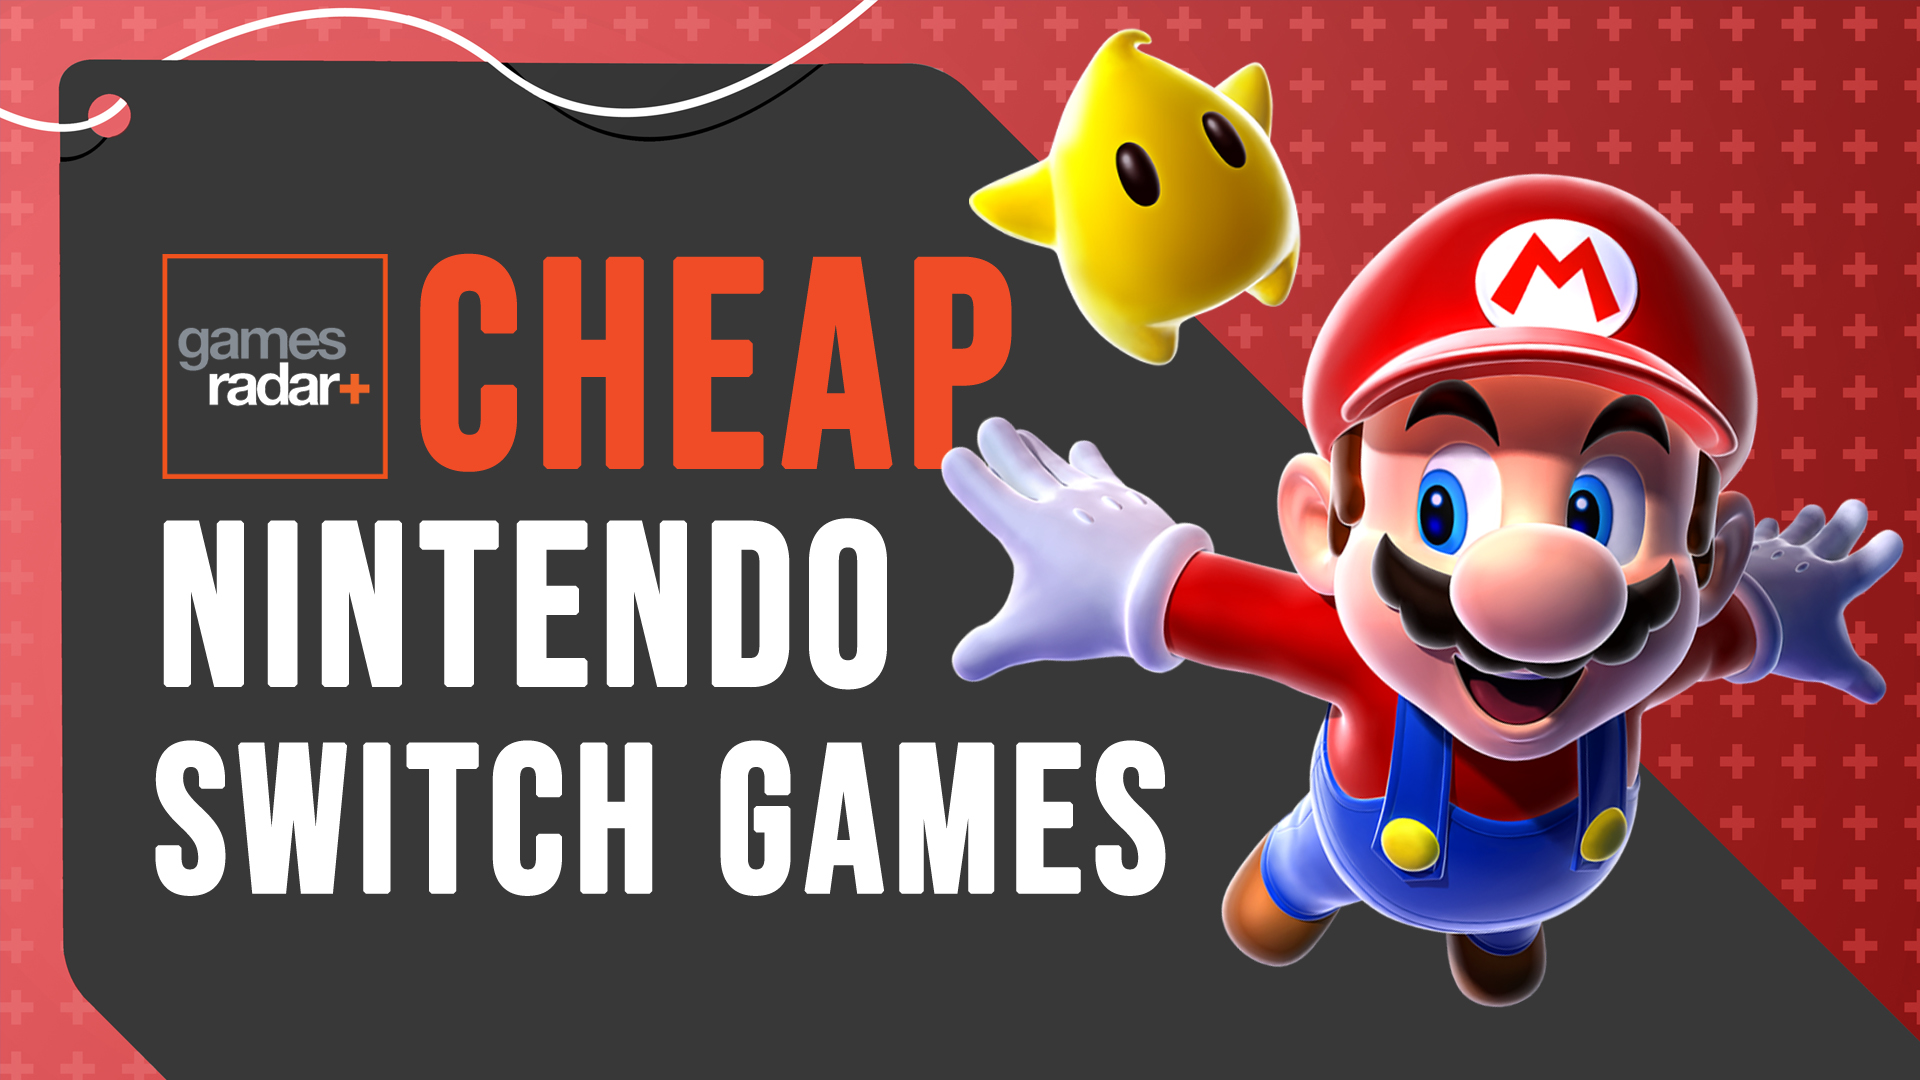 Cheap Nintendo Switch game sales - all the latest deals in | GamesRadar+